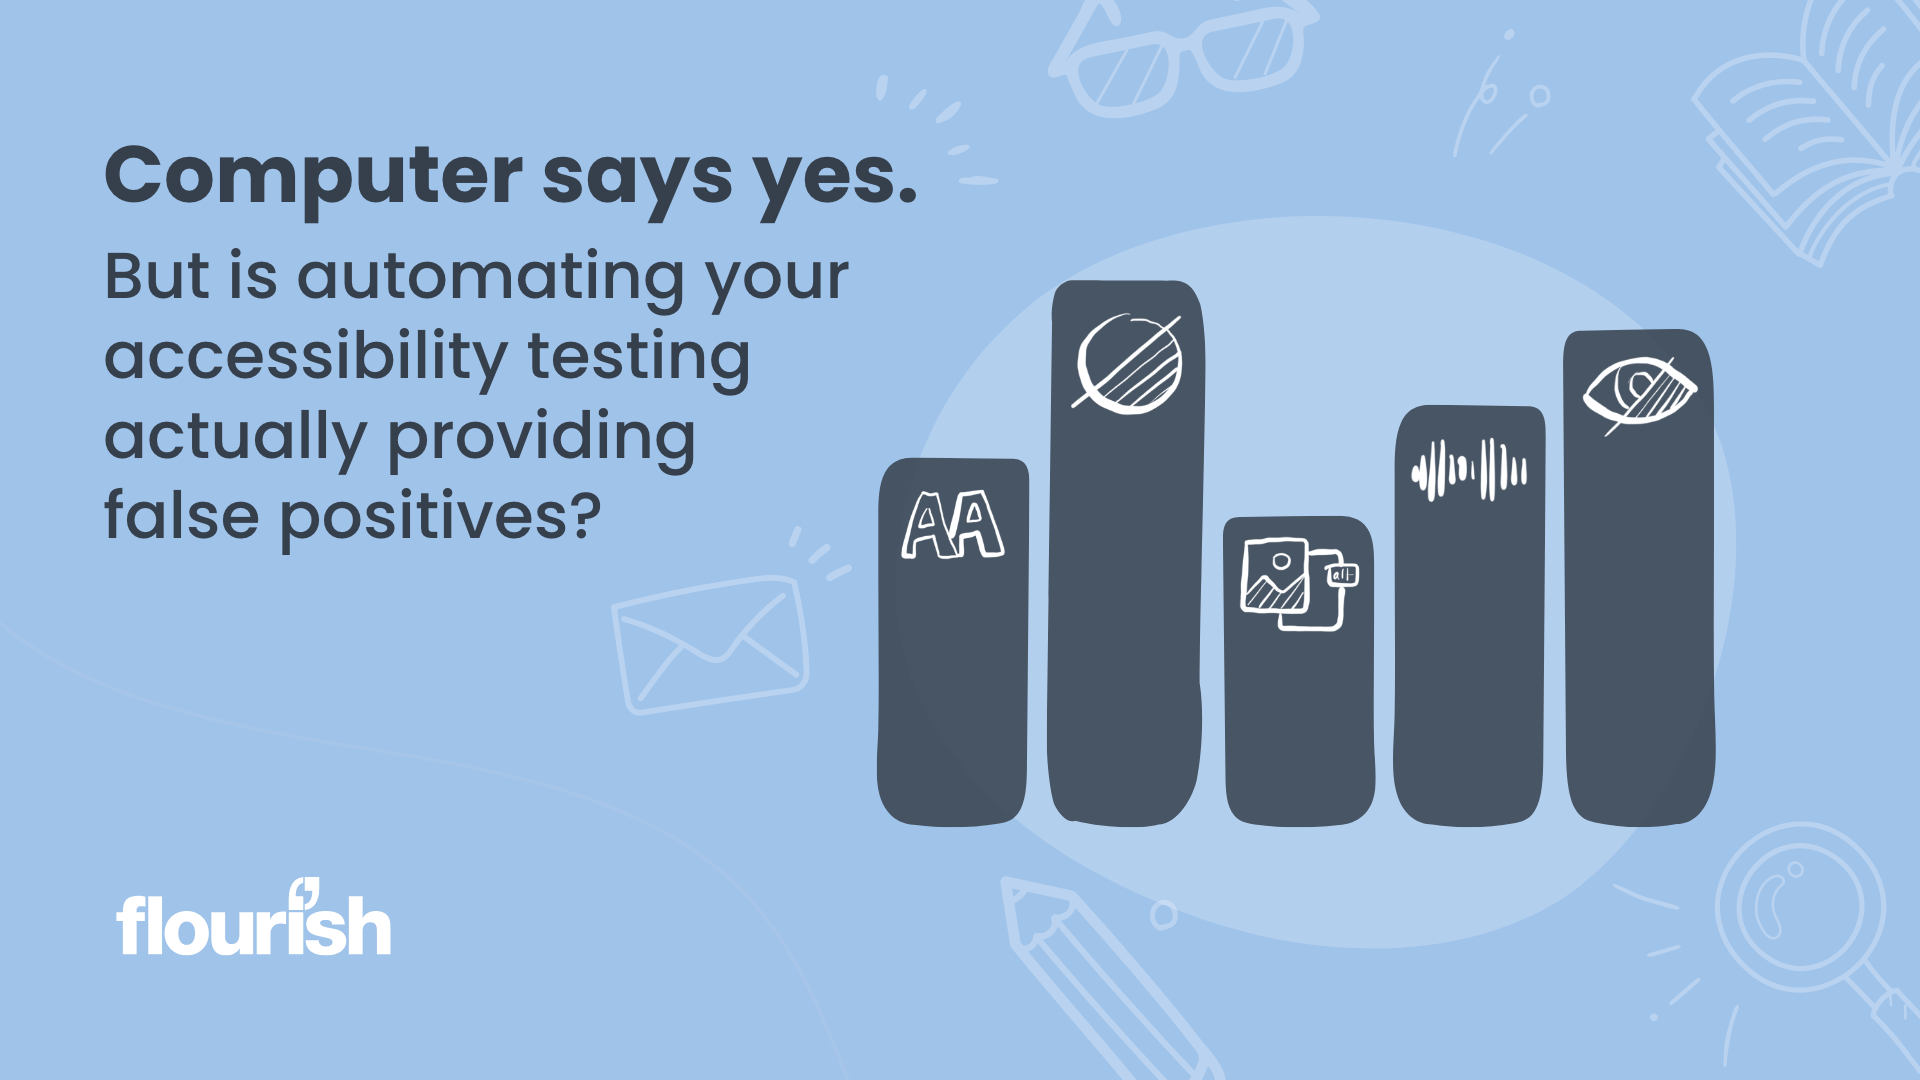 Is automating your accessibility testing actually providing false positives?